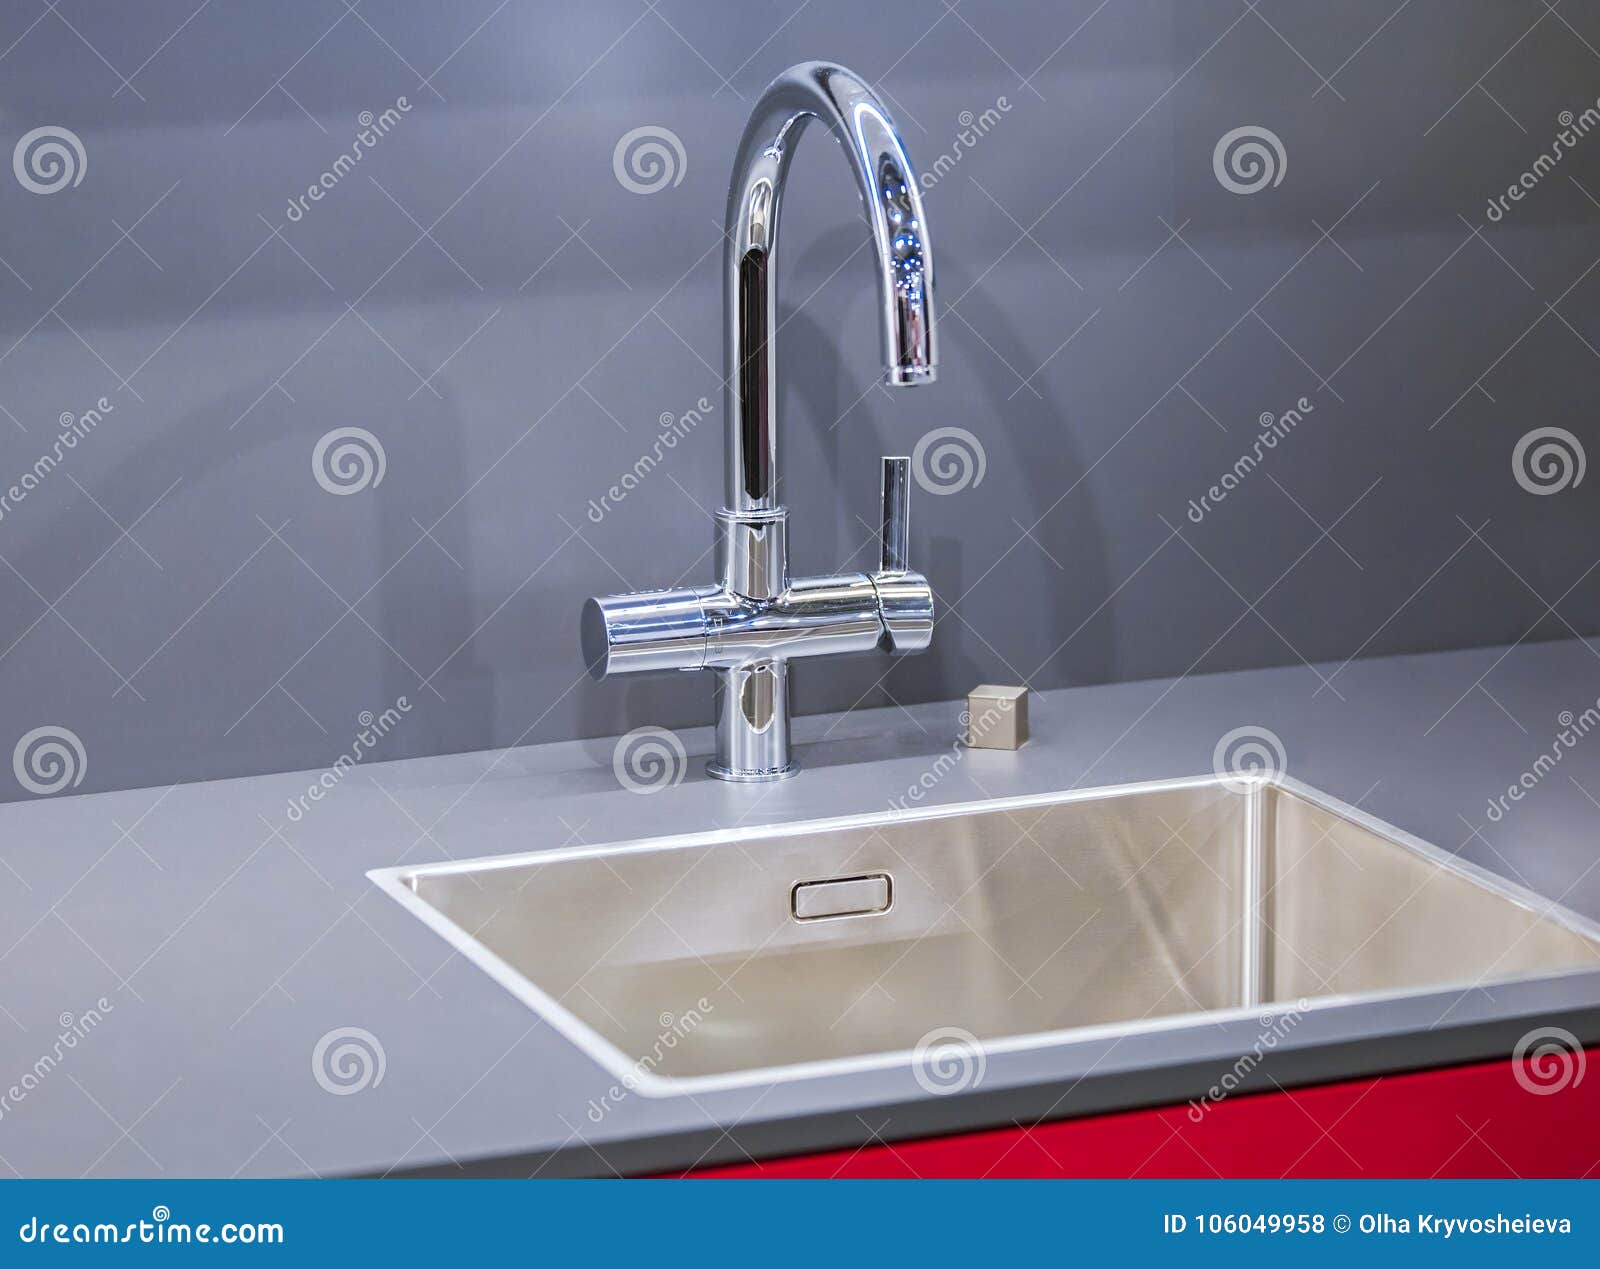 Kitchen Faucet Interior Shiny Stainless Steel Faucet With Chrome